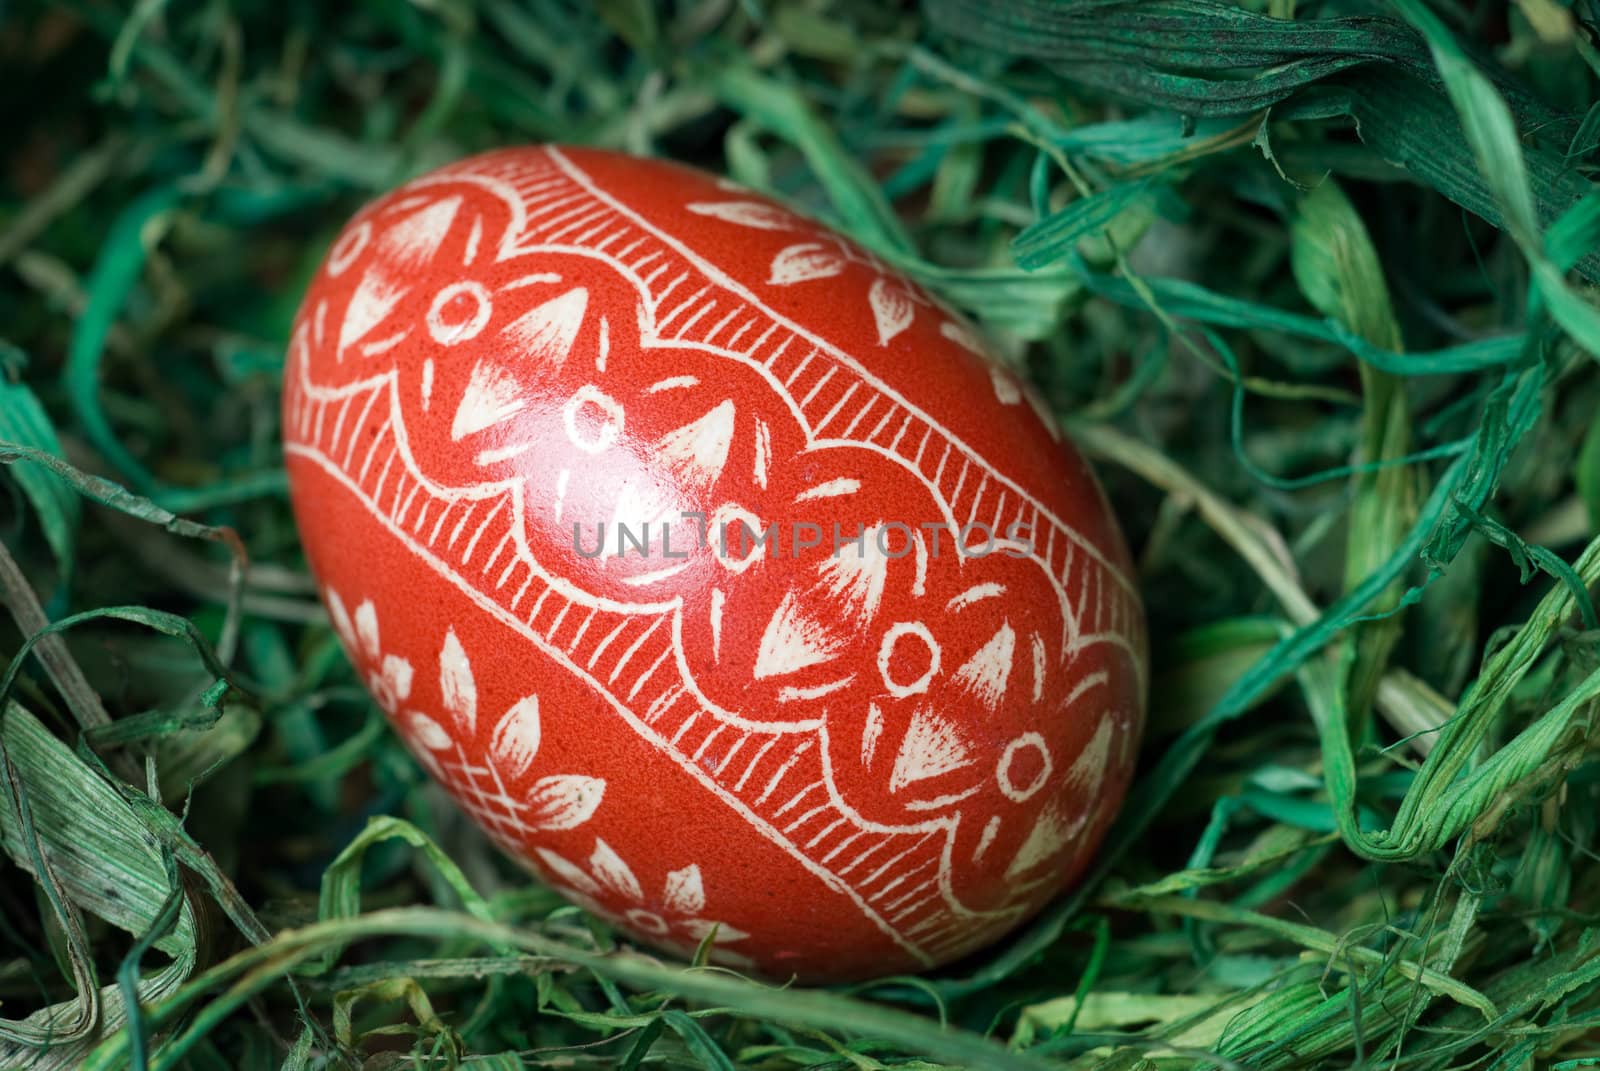 Handmade easter egg on the green hay. Shallow depth of field.